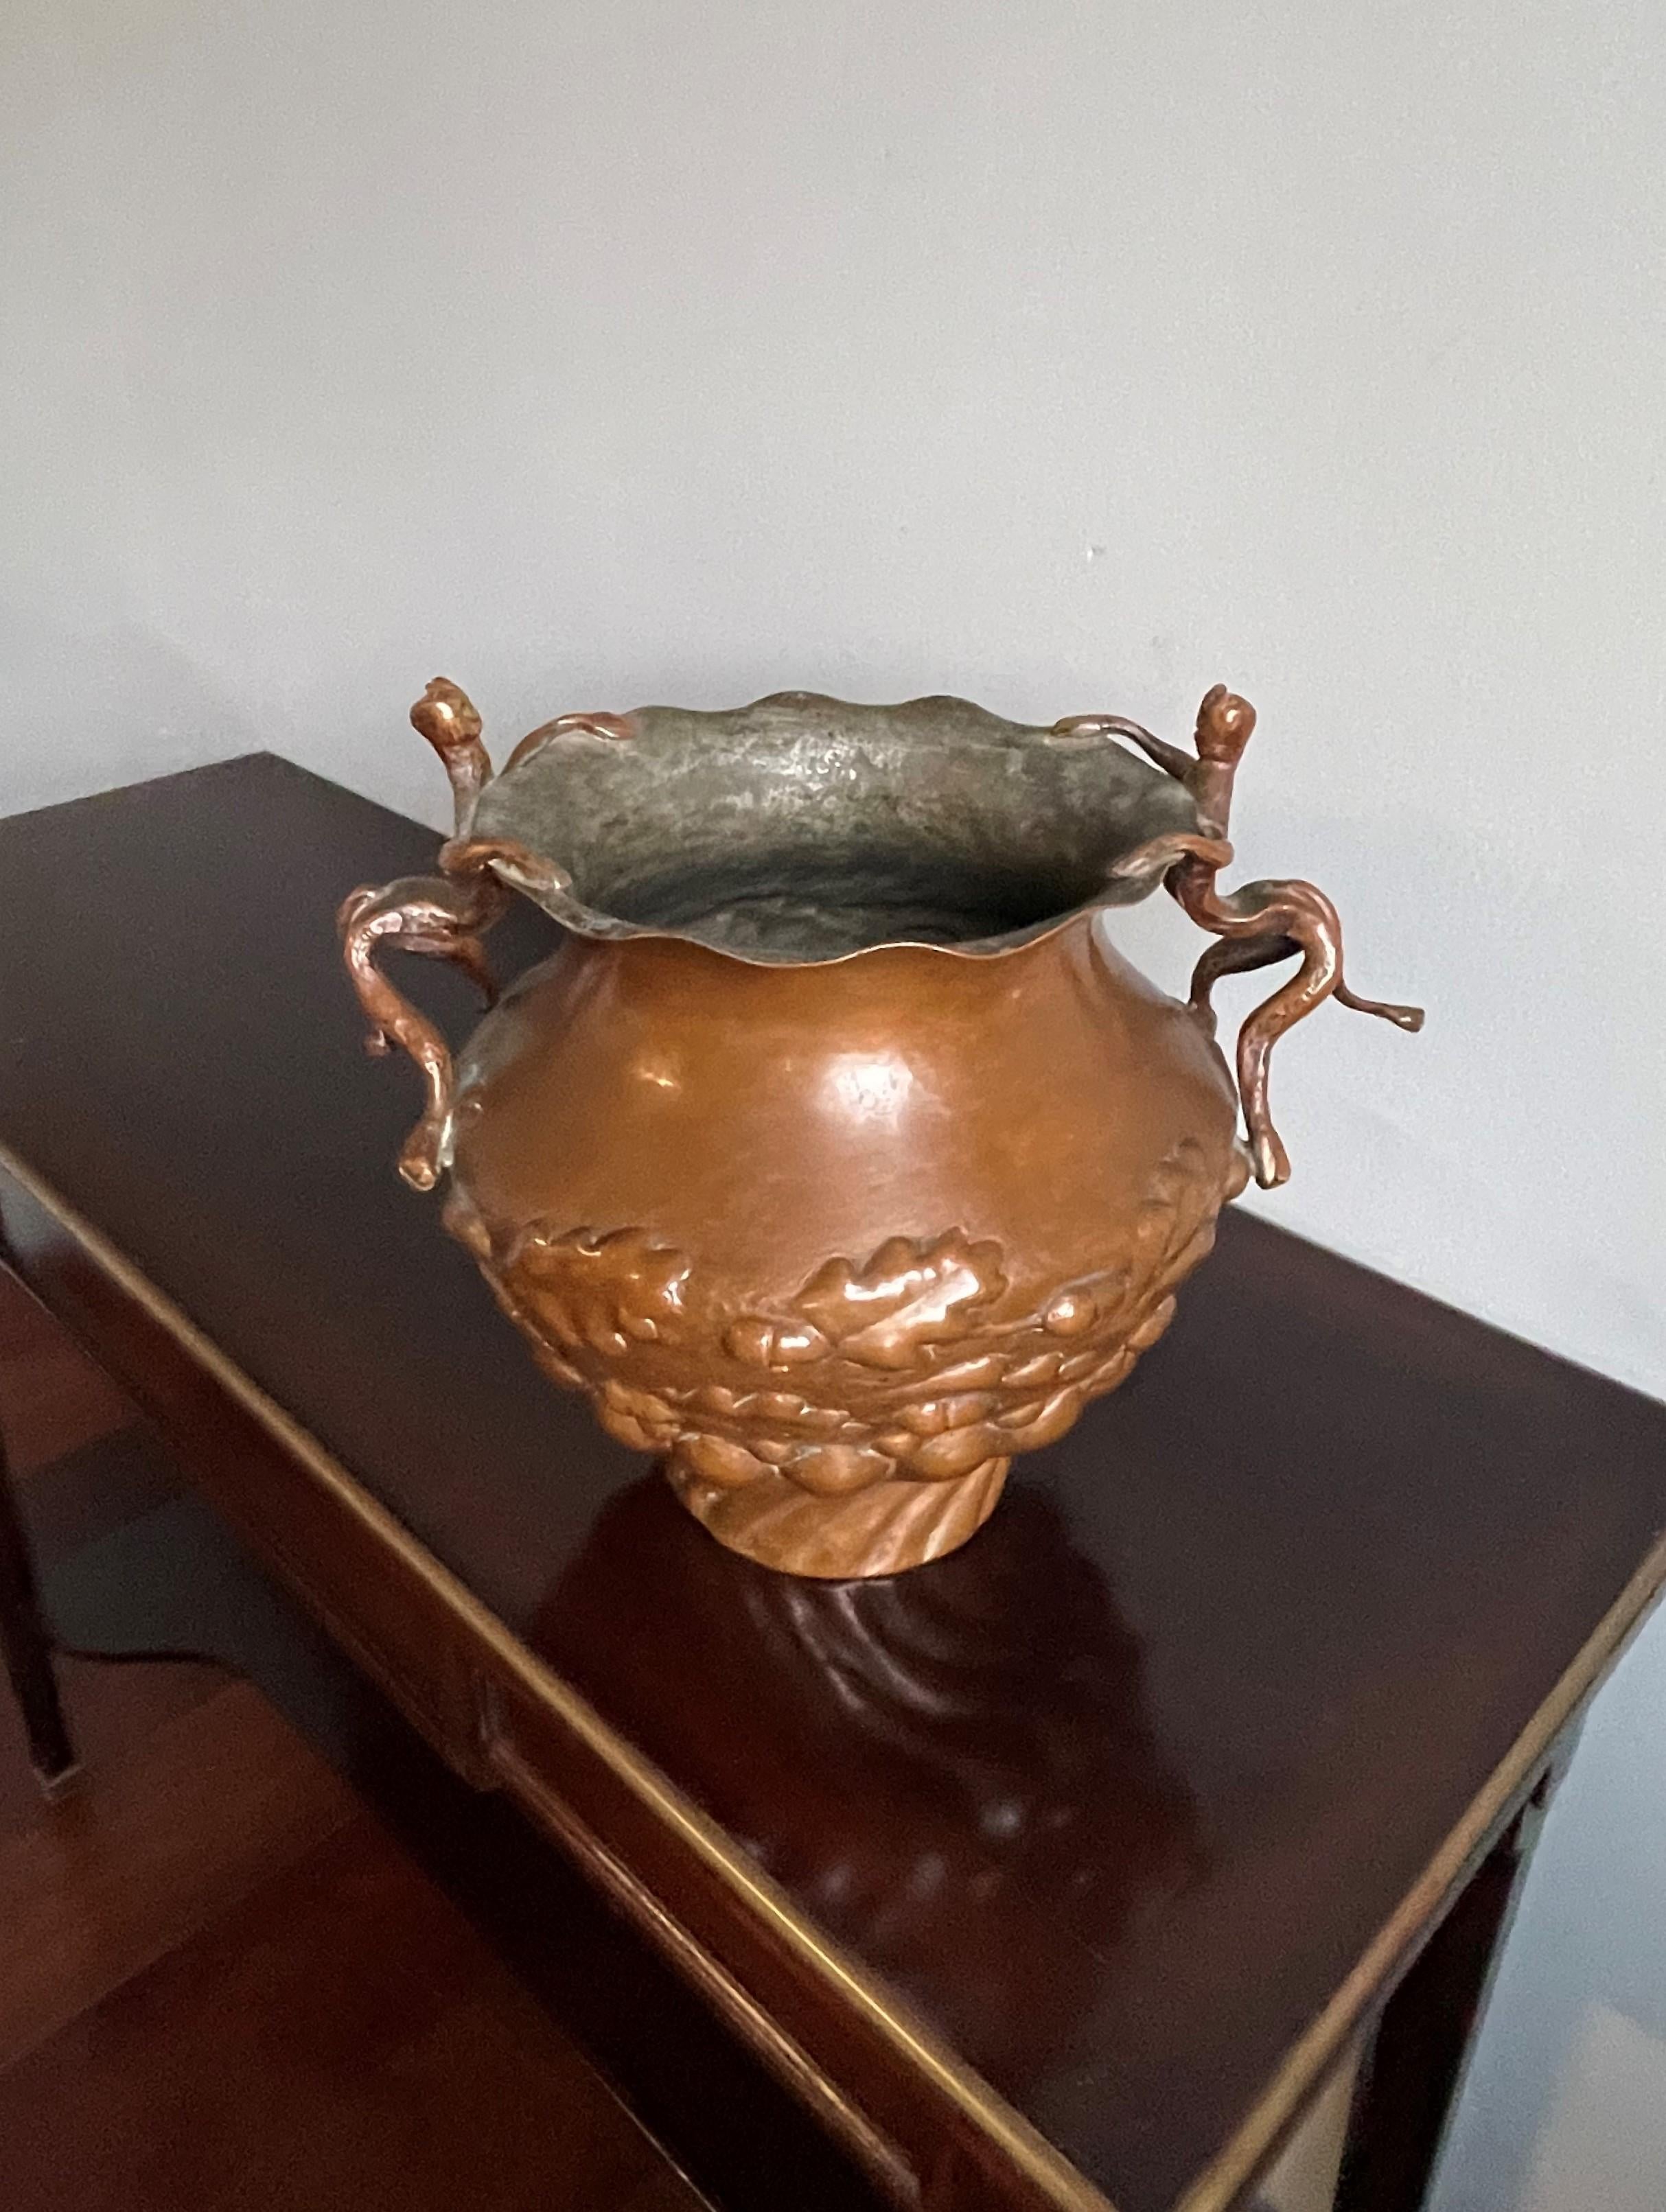 Unique Mid 1800s Embossed Copper Planter / Vase with Satyr Sculptures as Handles For Sale 5